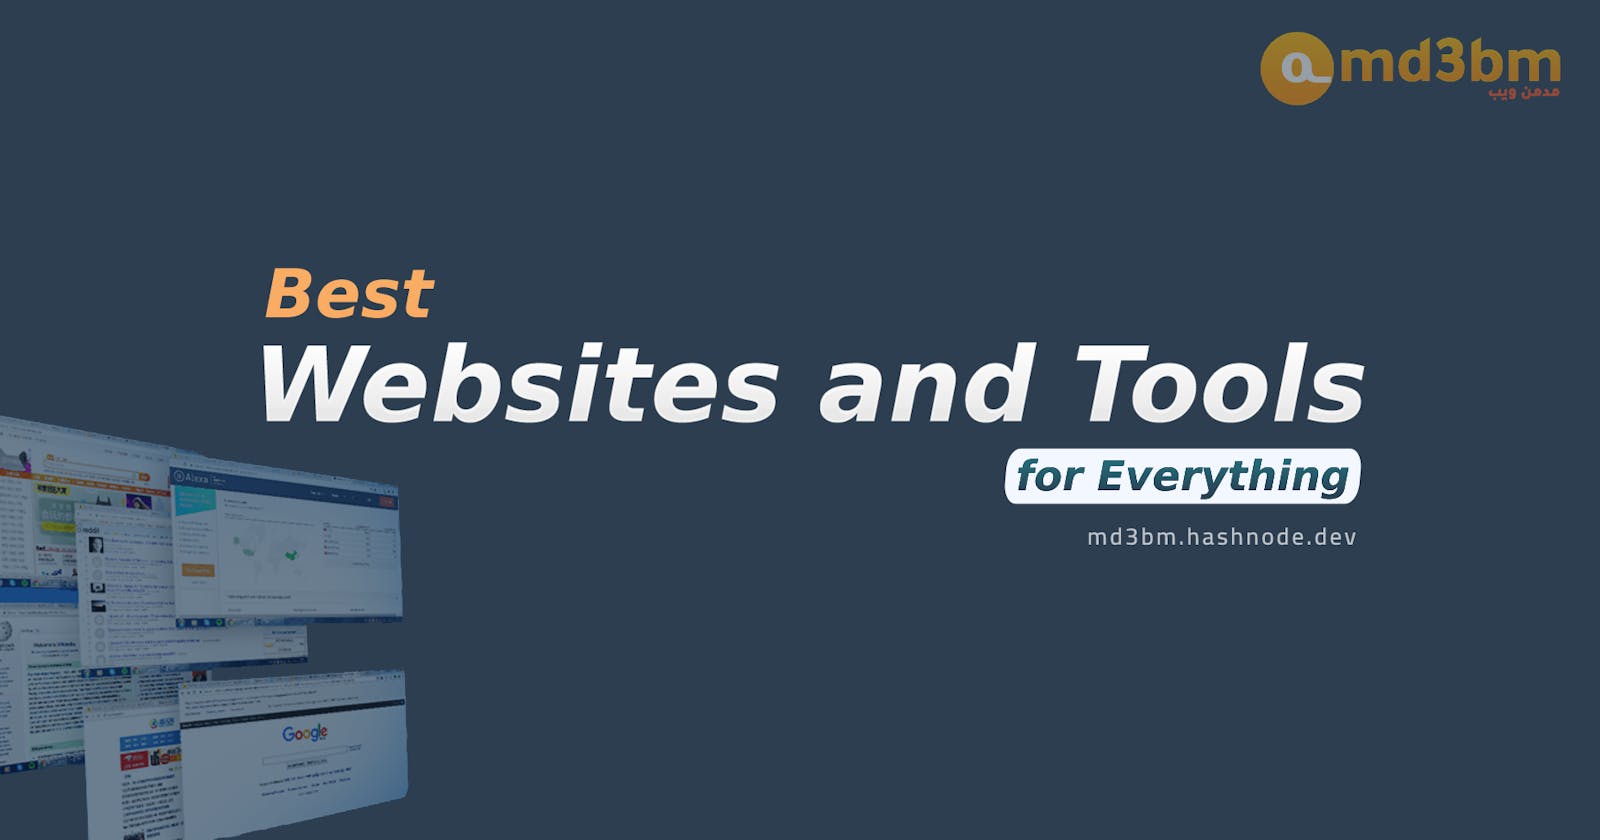 Most Useful Websites and Tools for Everything